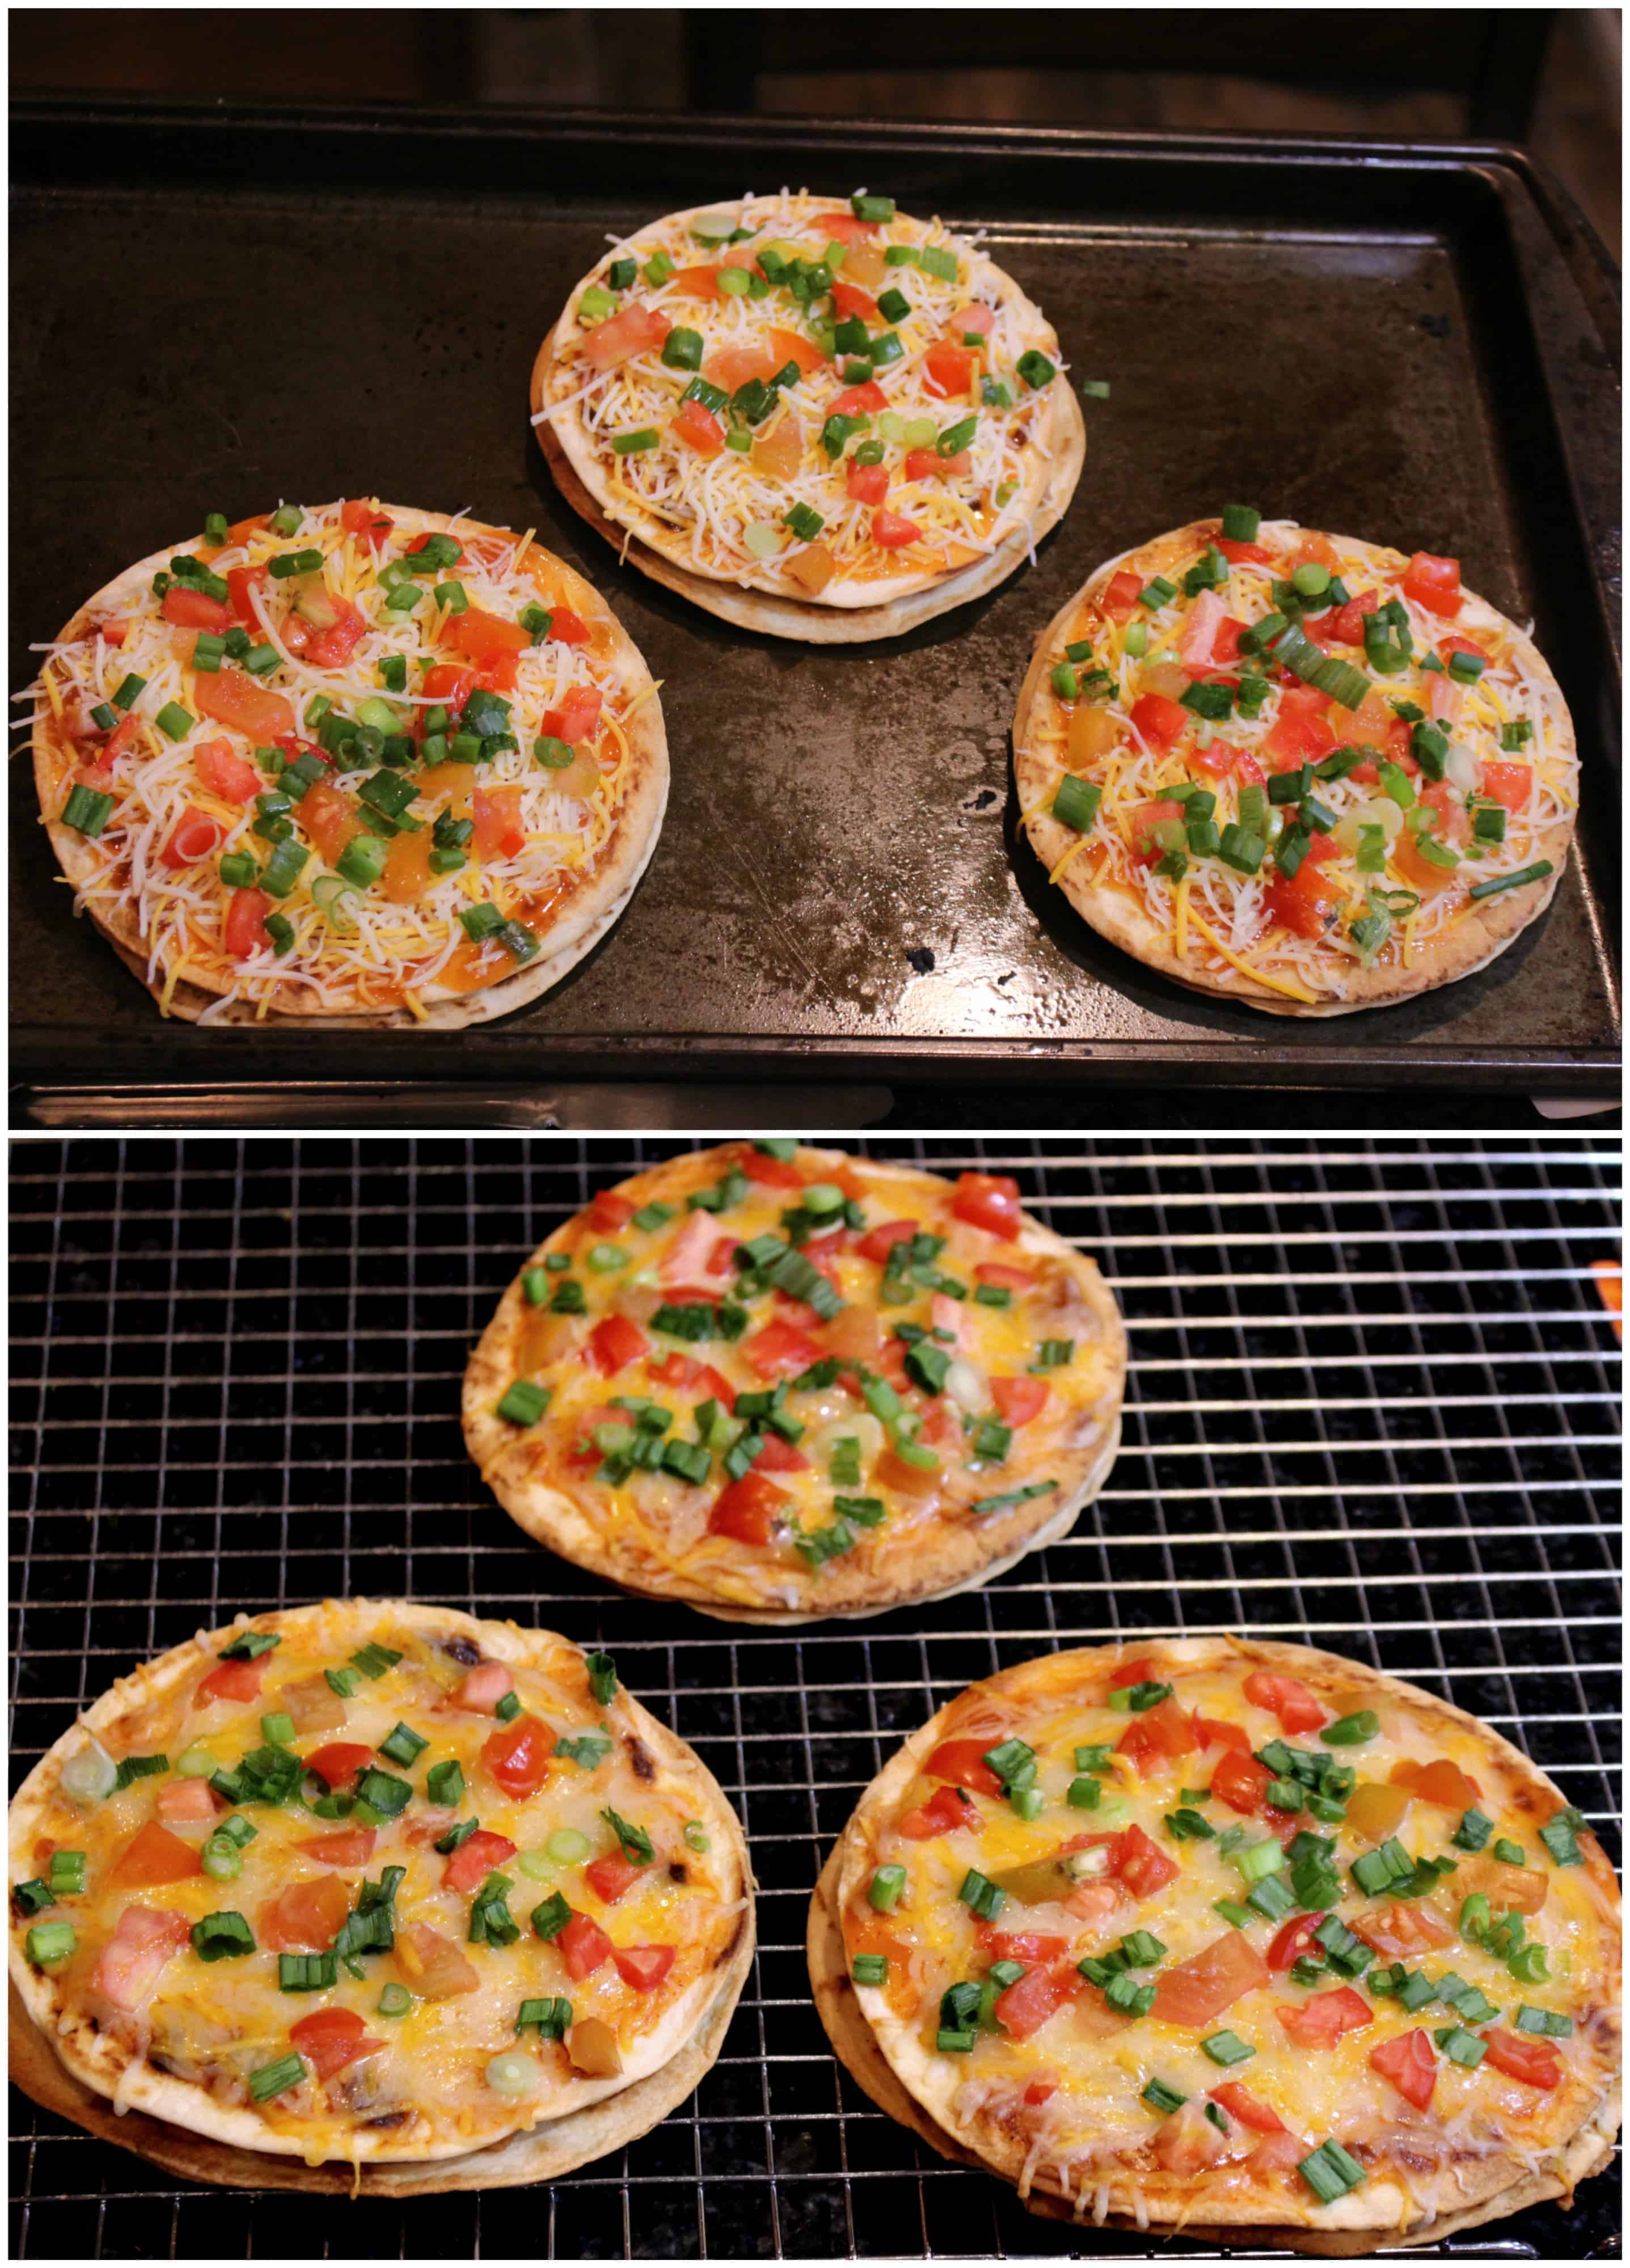 Mexican Pizza is baking in the oven on over tray